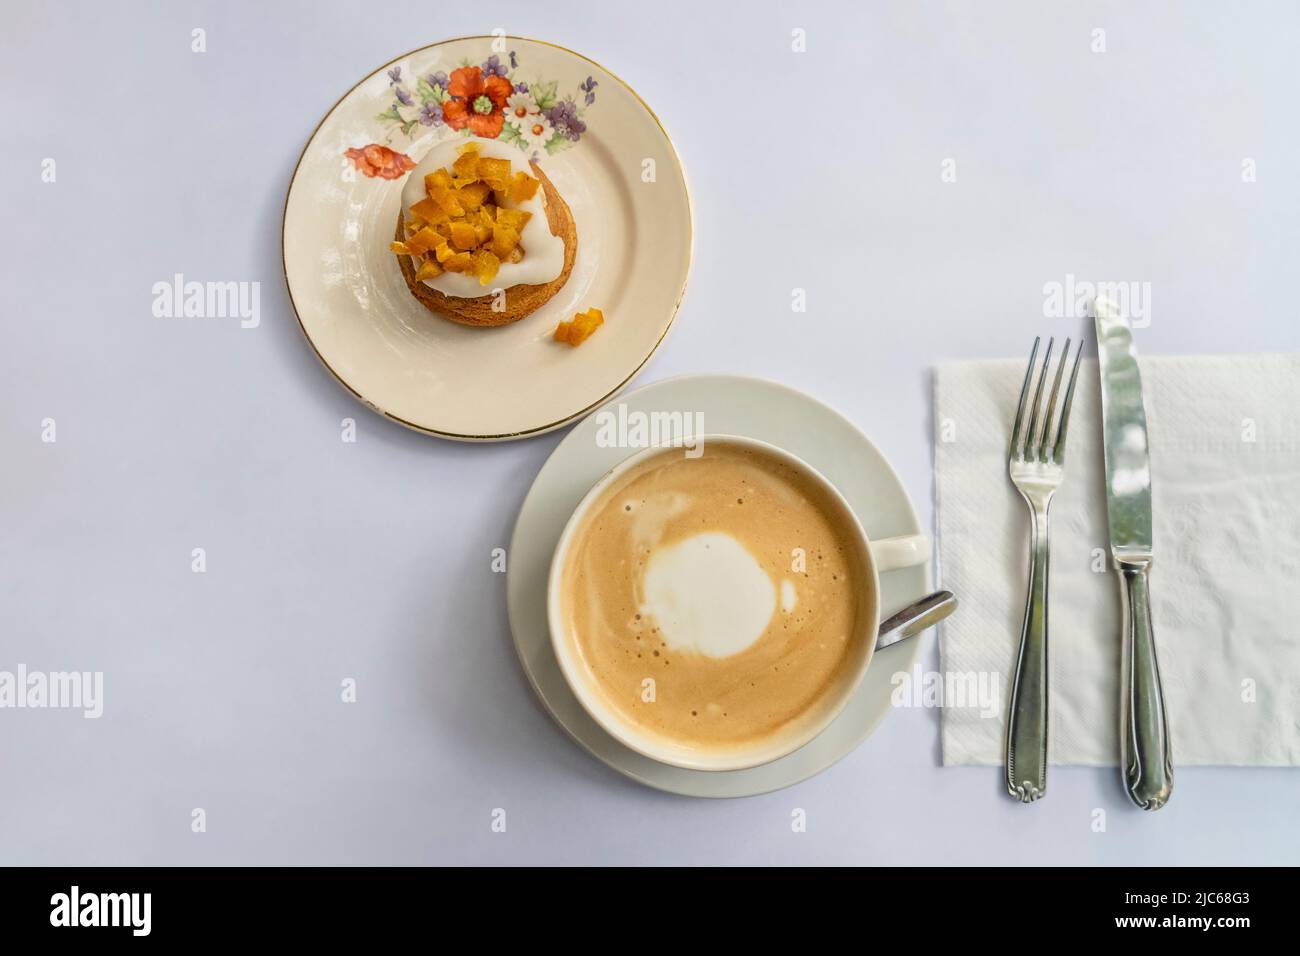 Top view of a latte and an orange cupcake on vintage crockery Stock Photo